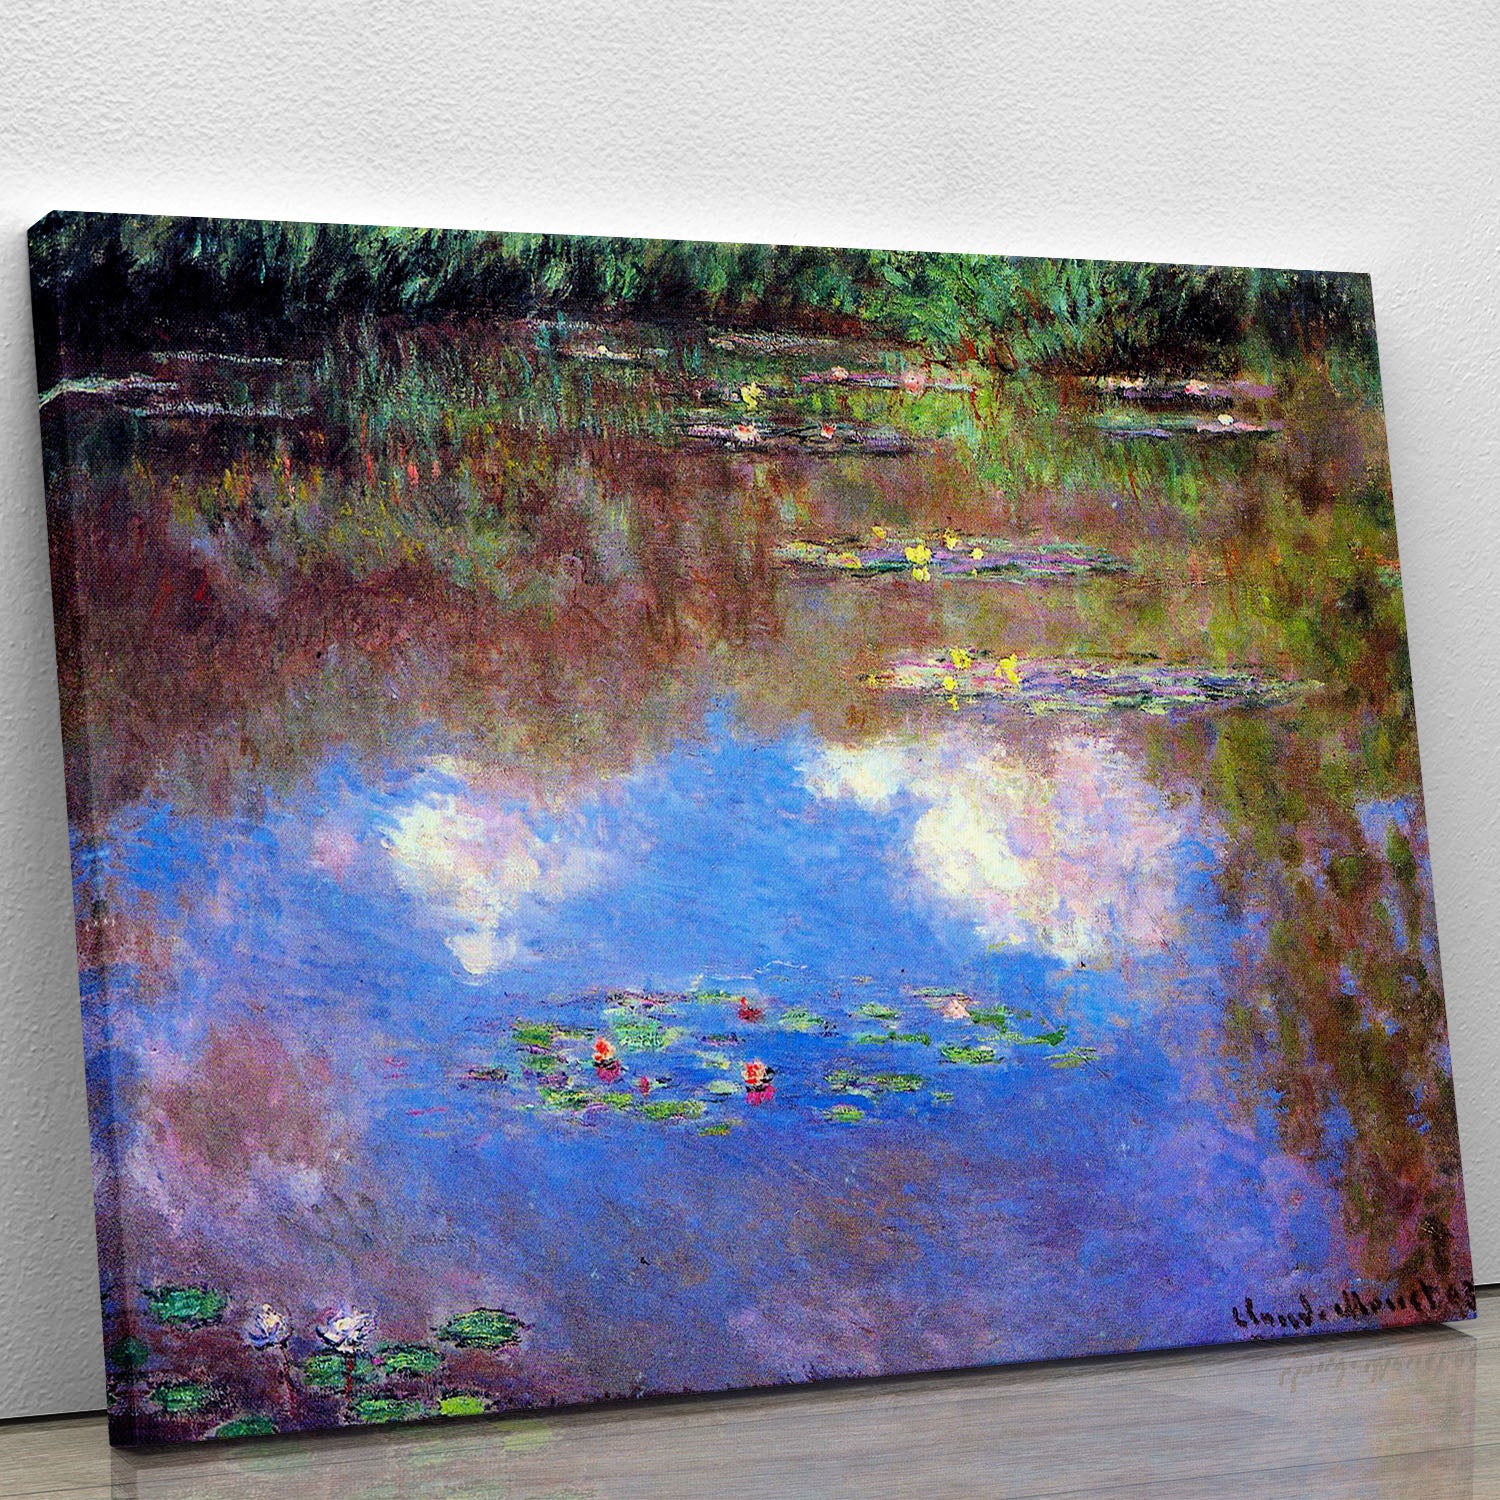 Water Lily Pond 4 by Monet Canvas Print or Poster - Canvas Art Rocks - 1